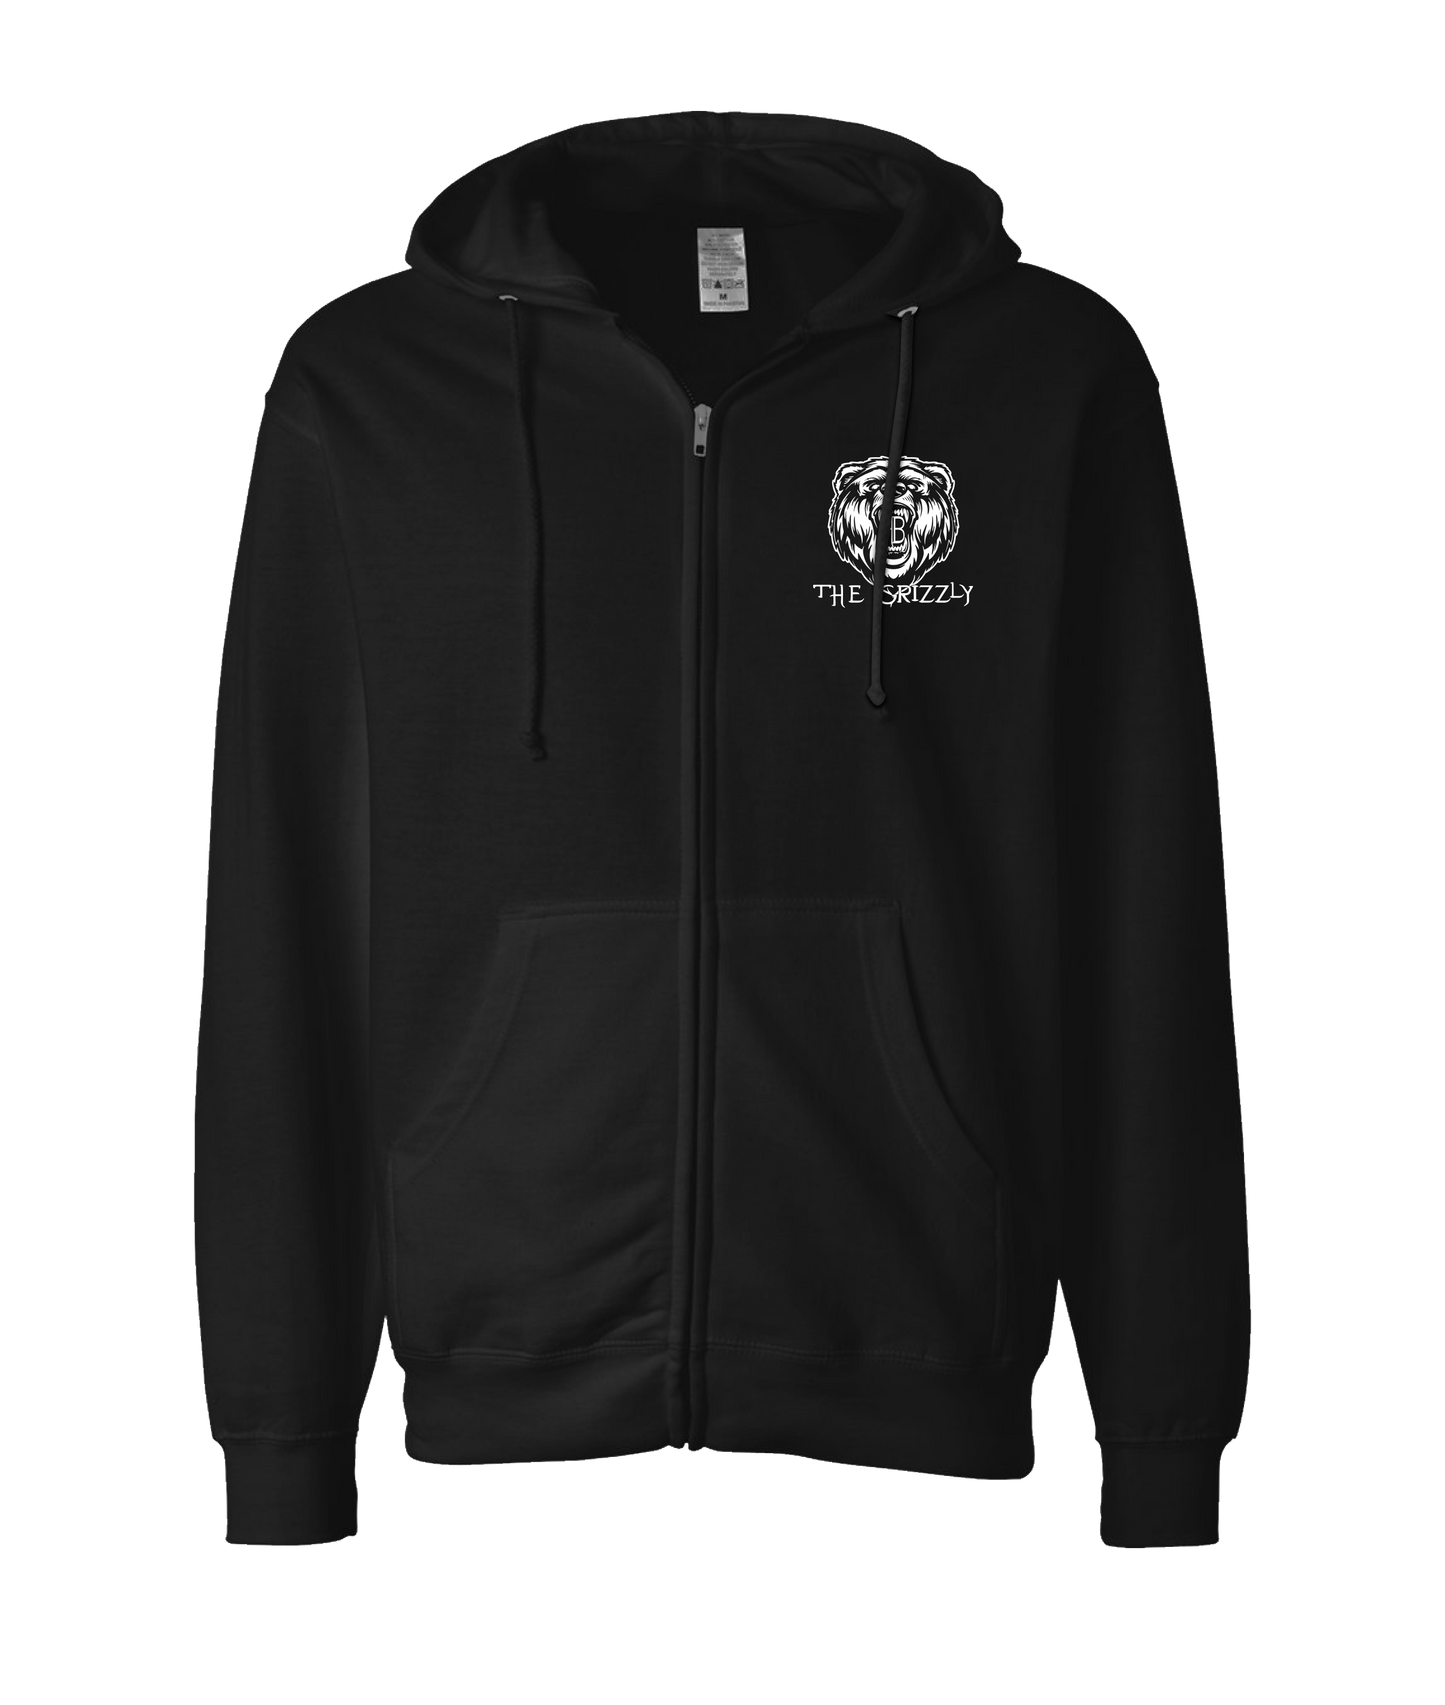 HB The Grizzly - Bear Logo - Black Zip Up Hoodie